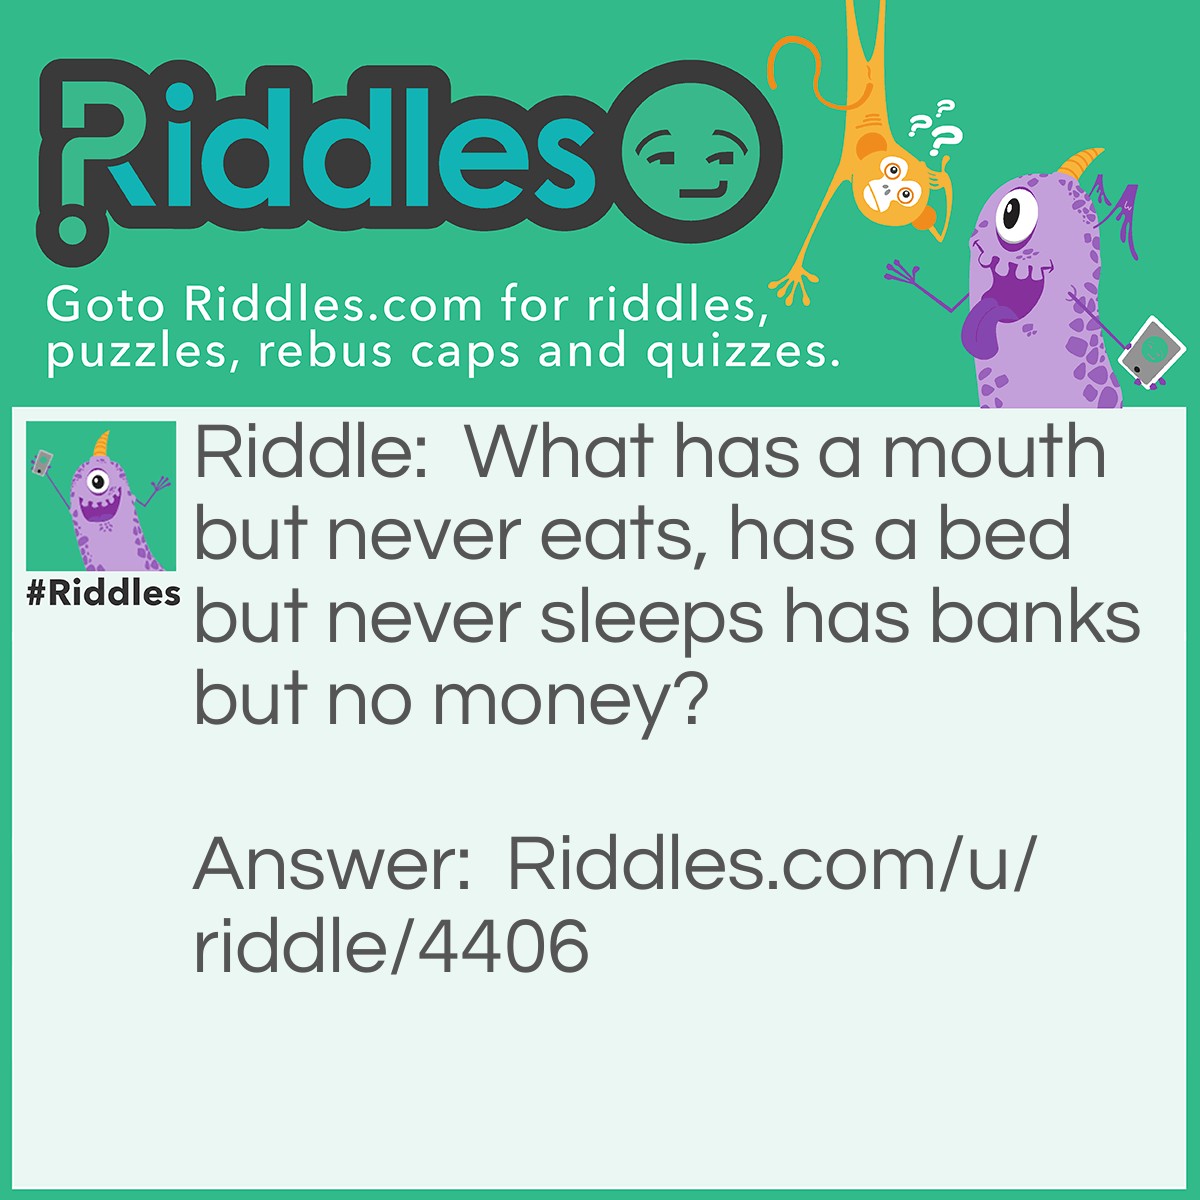 Riddle: What has a mouth but never eats, has a bed but never sleeps has banks but no money? Answer: A river.